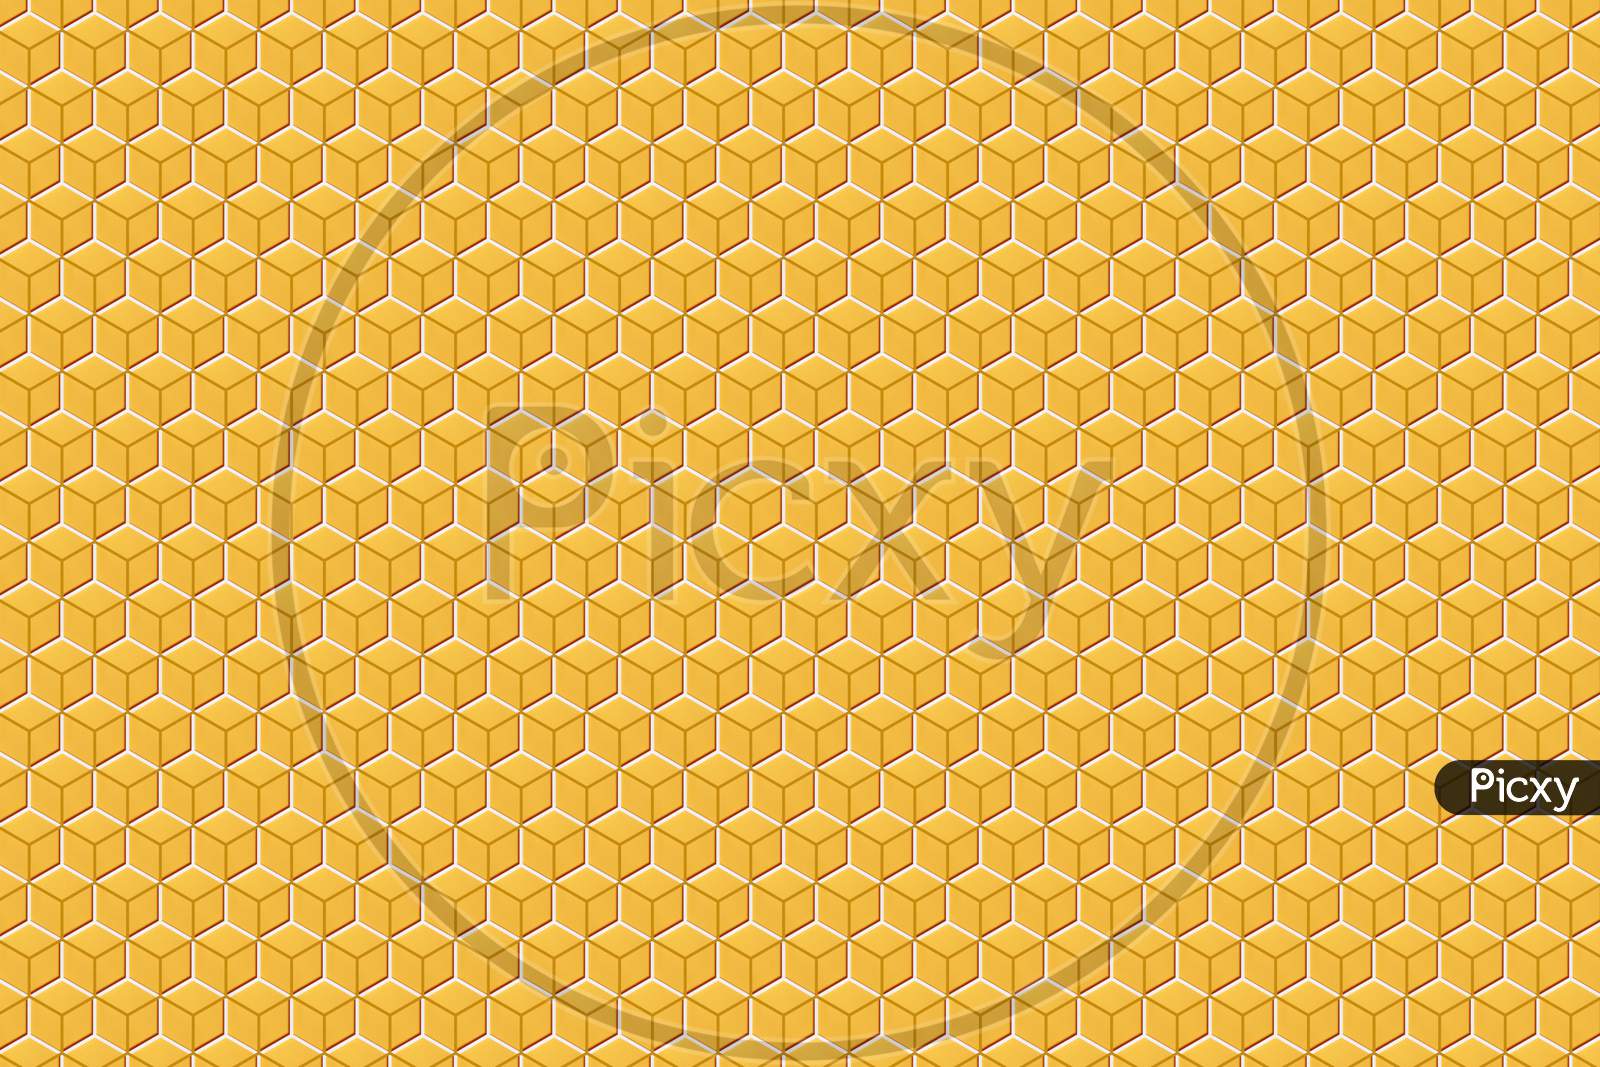 3D Illustration Of A Yellow And White Honeycomb Monochrome Honeycomb For Honey. Pattern Of Simple Geometric Hexagonal Shapes, Mosaic Background. Bee Honeycomb Concept, Beehive